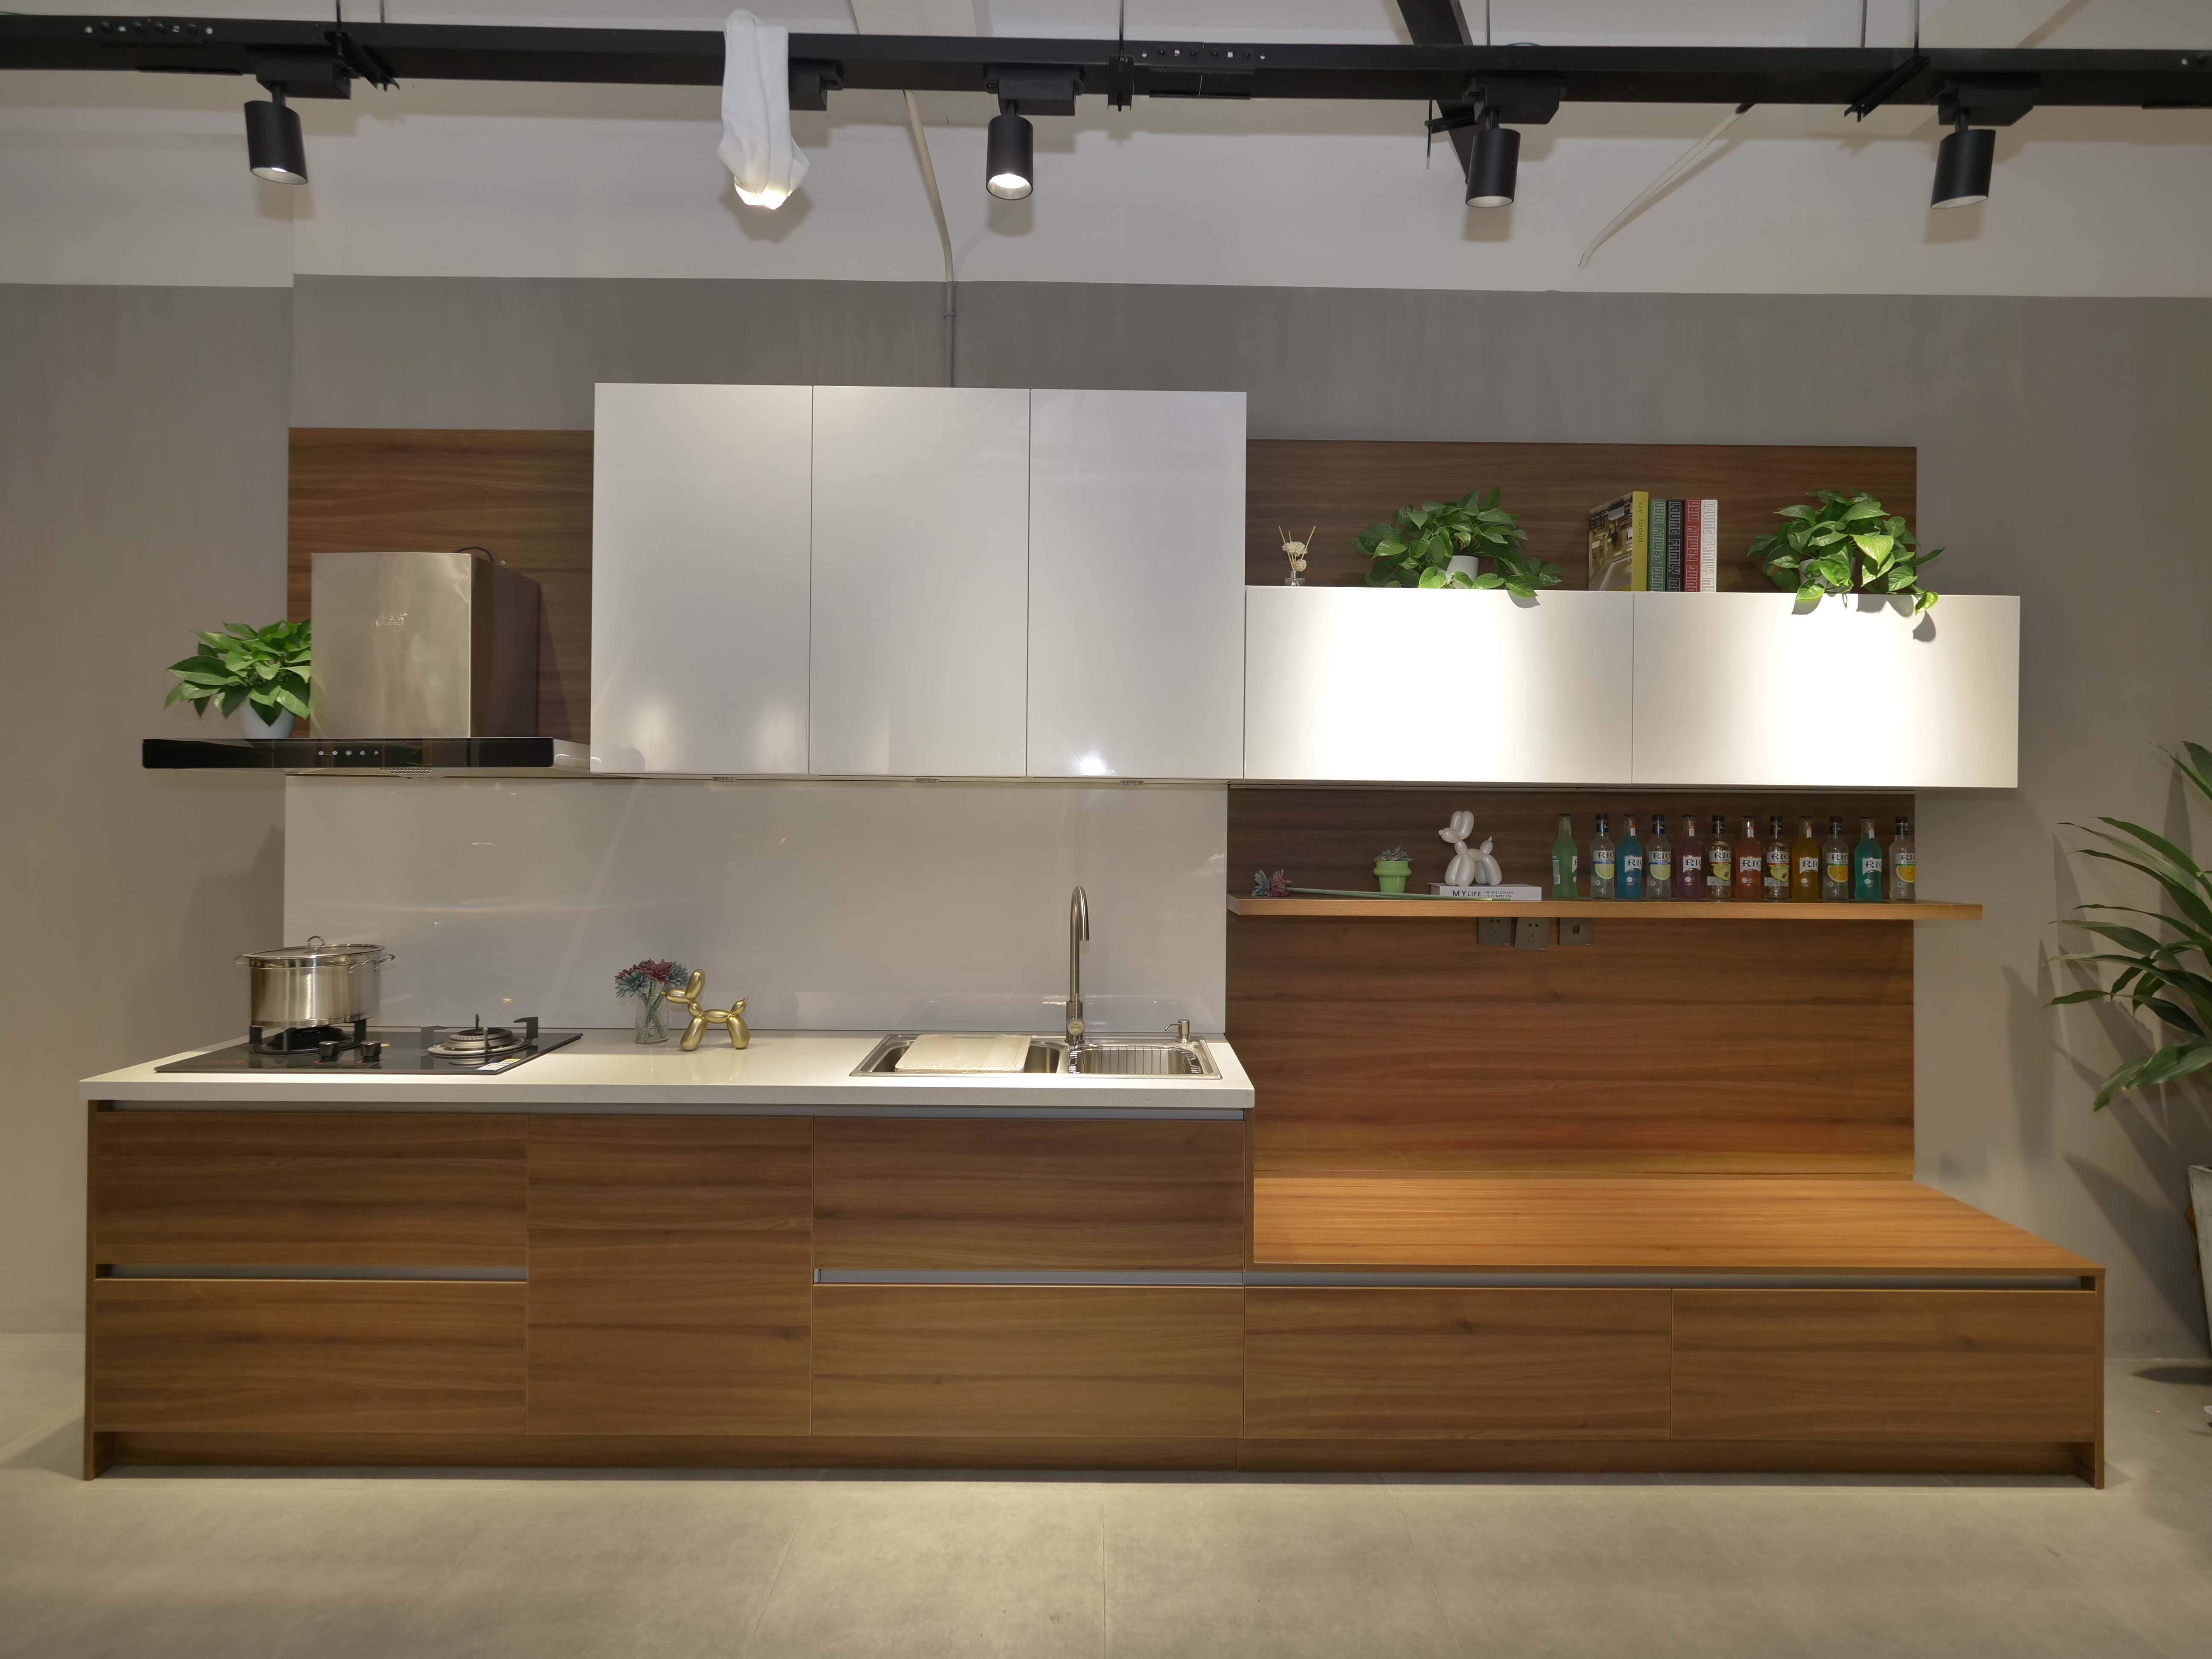 AisDecor laminate kitchen cabinet one-stop solutions